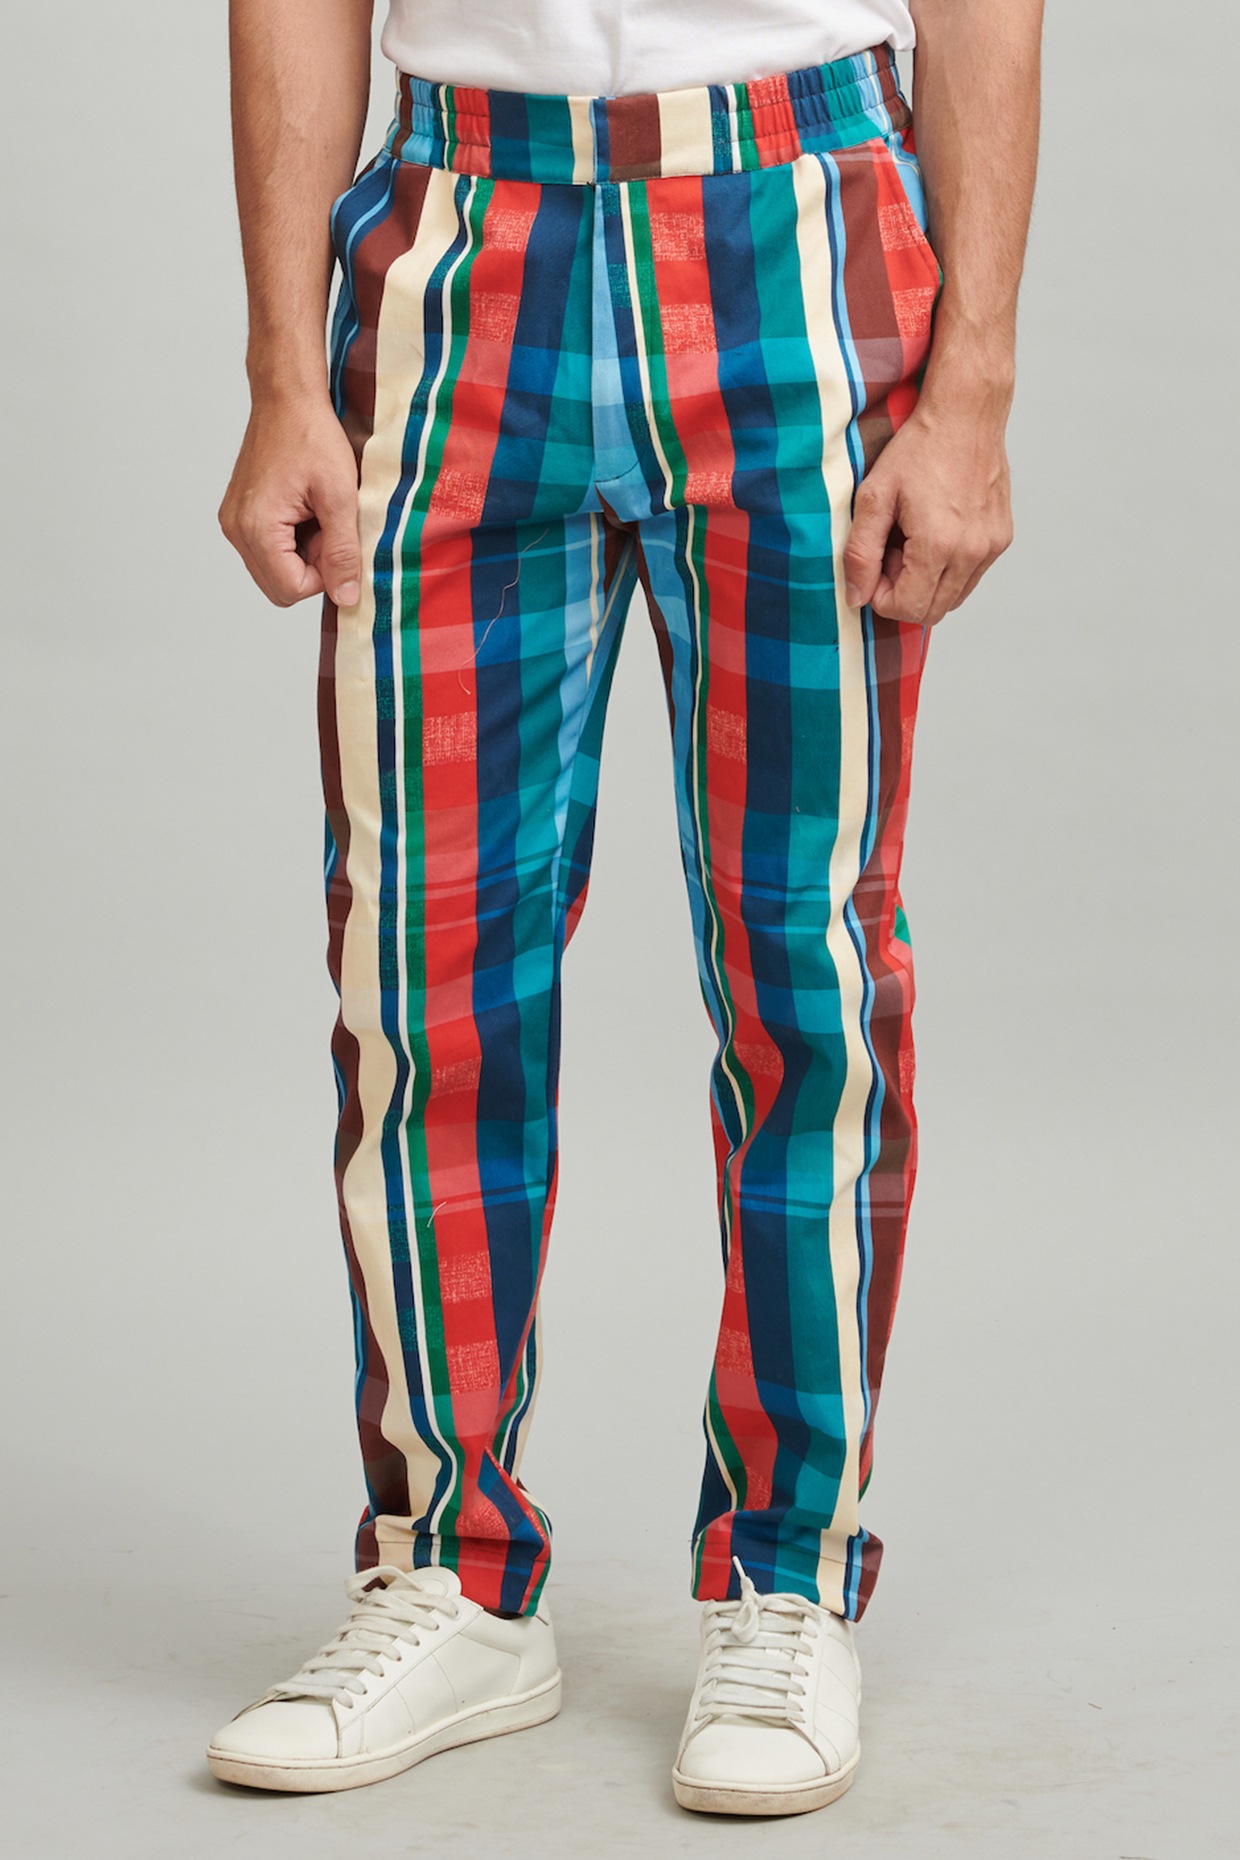 How to Rock Colorful Pants  The GentleManual